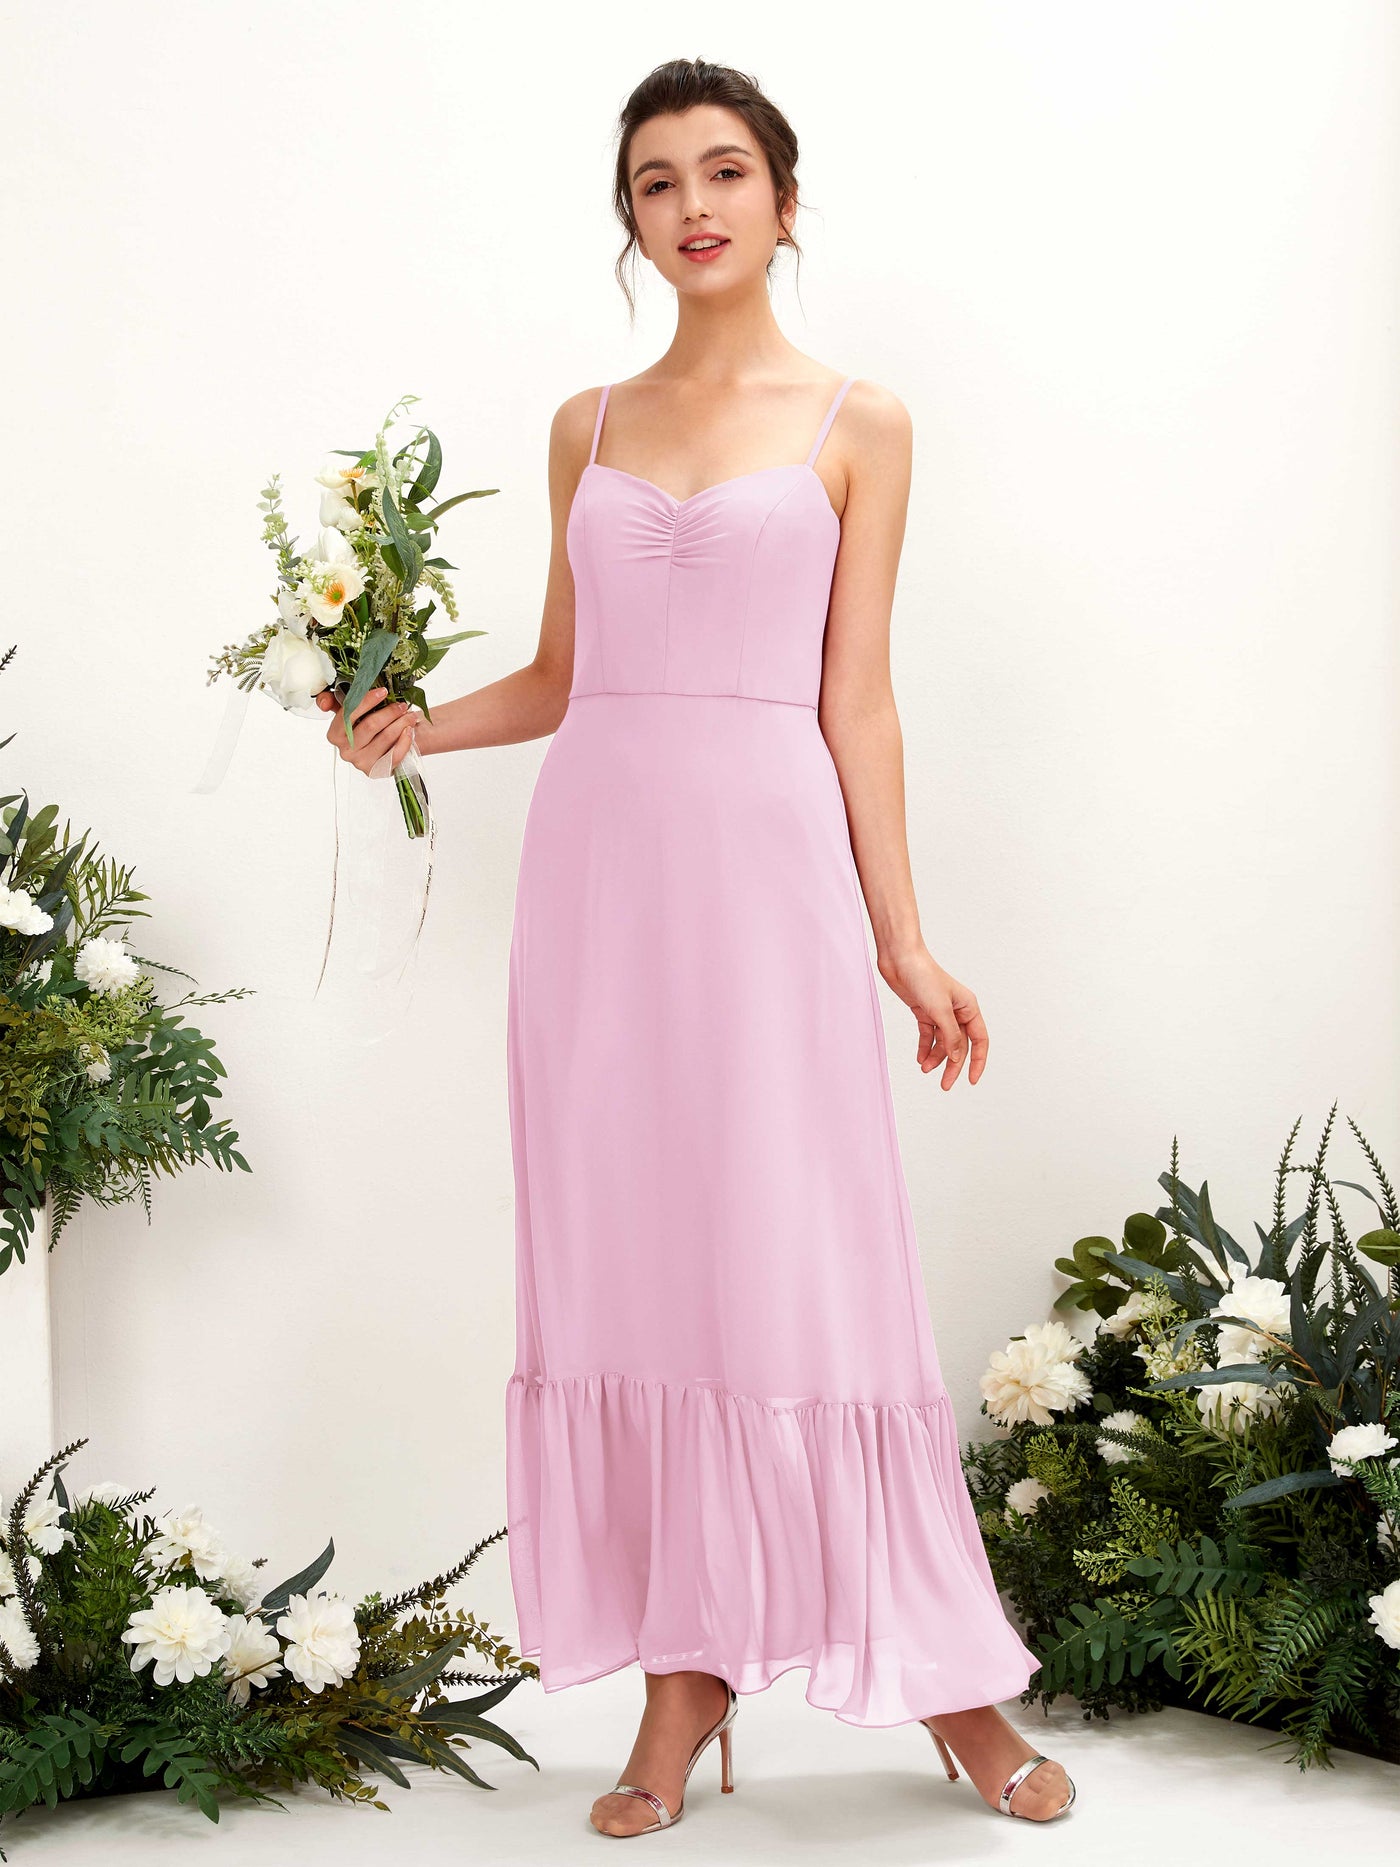 Candy Pink Bridesmaid Dresses Bridesmaid Dress Chiffon Spaghetti-straps Full Length Sleeveless Wedding Party Dress (81223039)#color_candy-pink